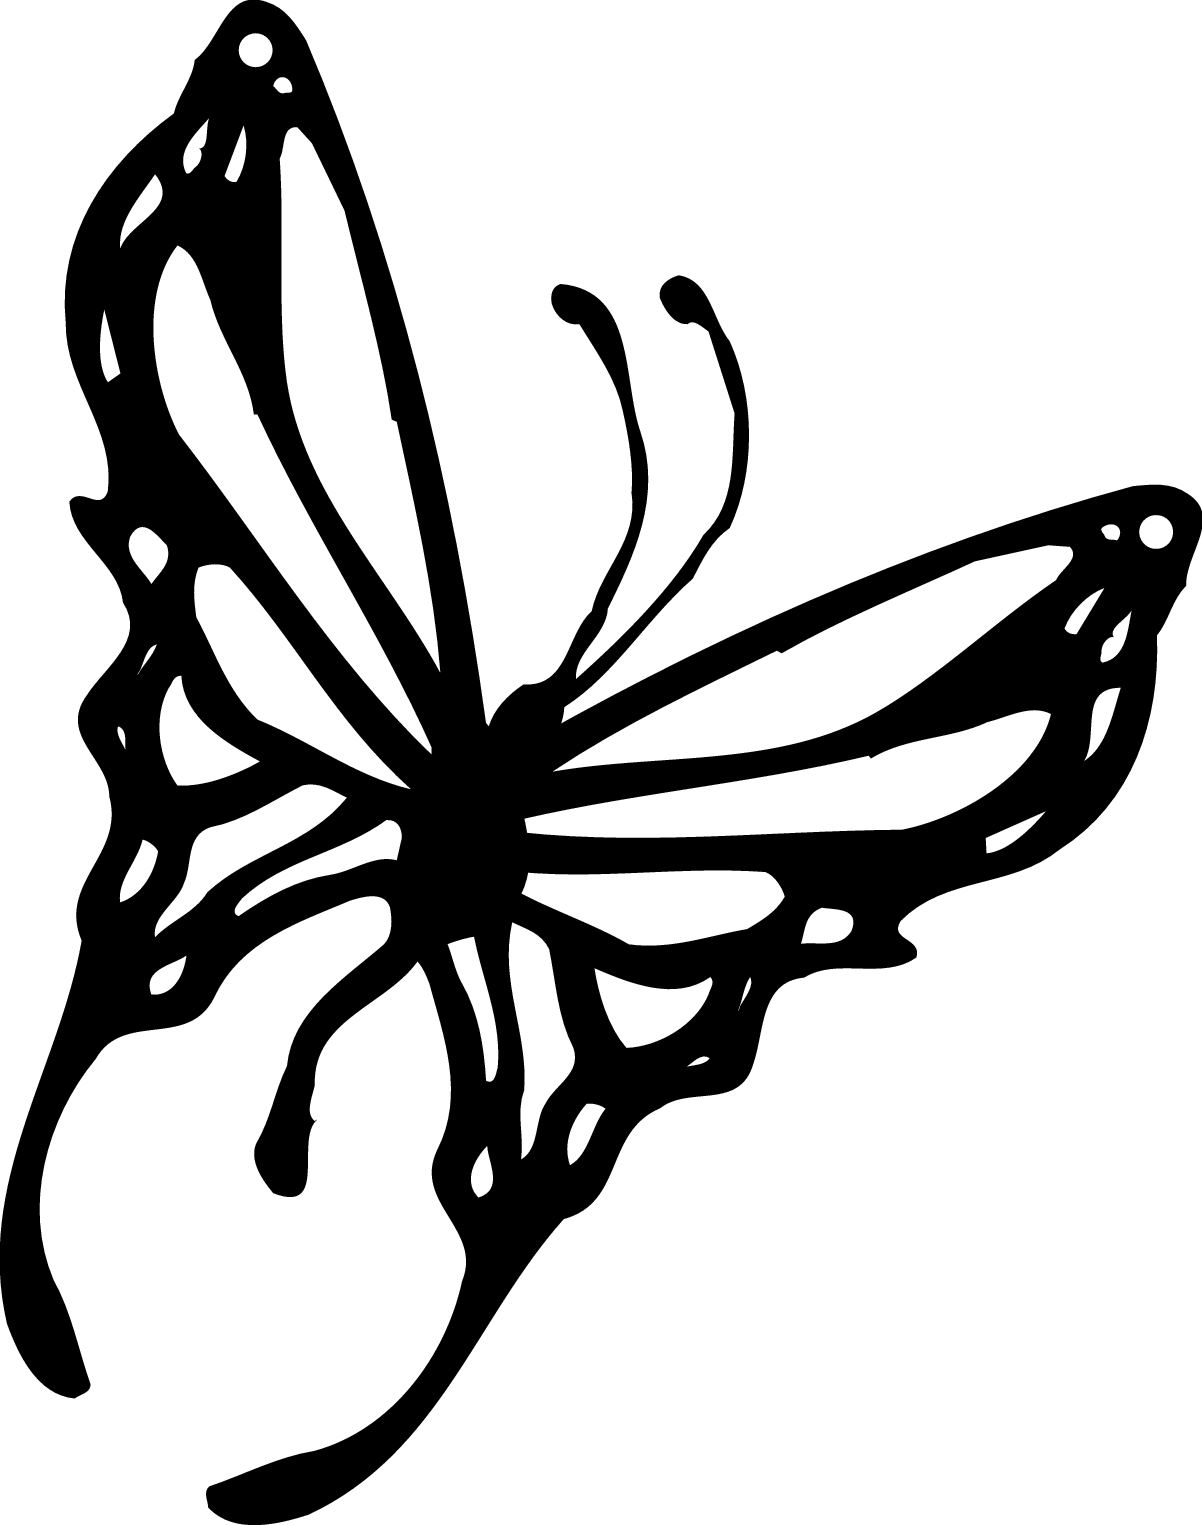 Black Butterfly Clip Art - Clipart library